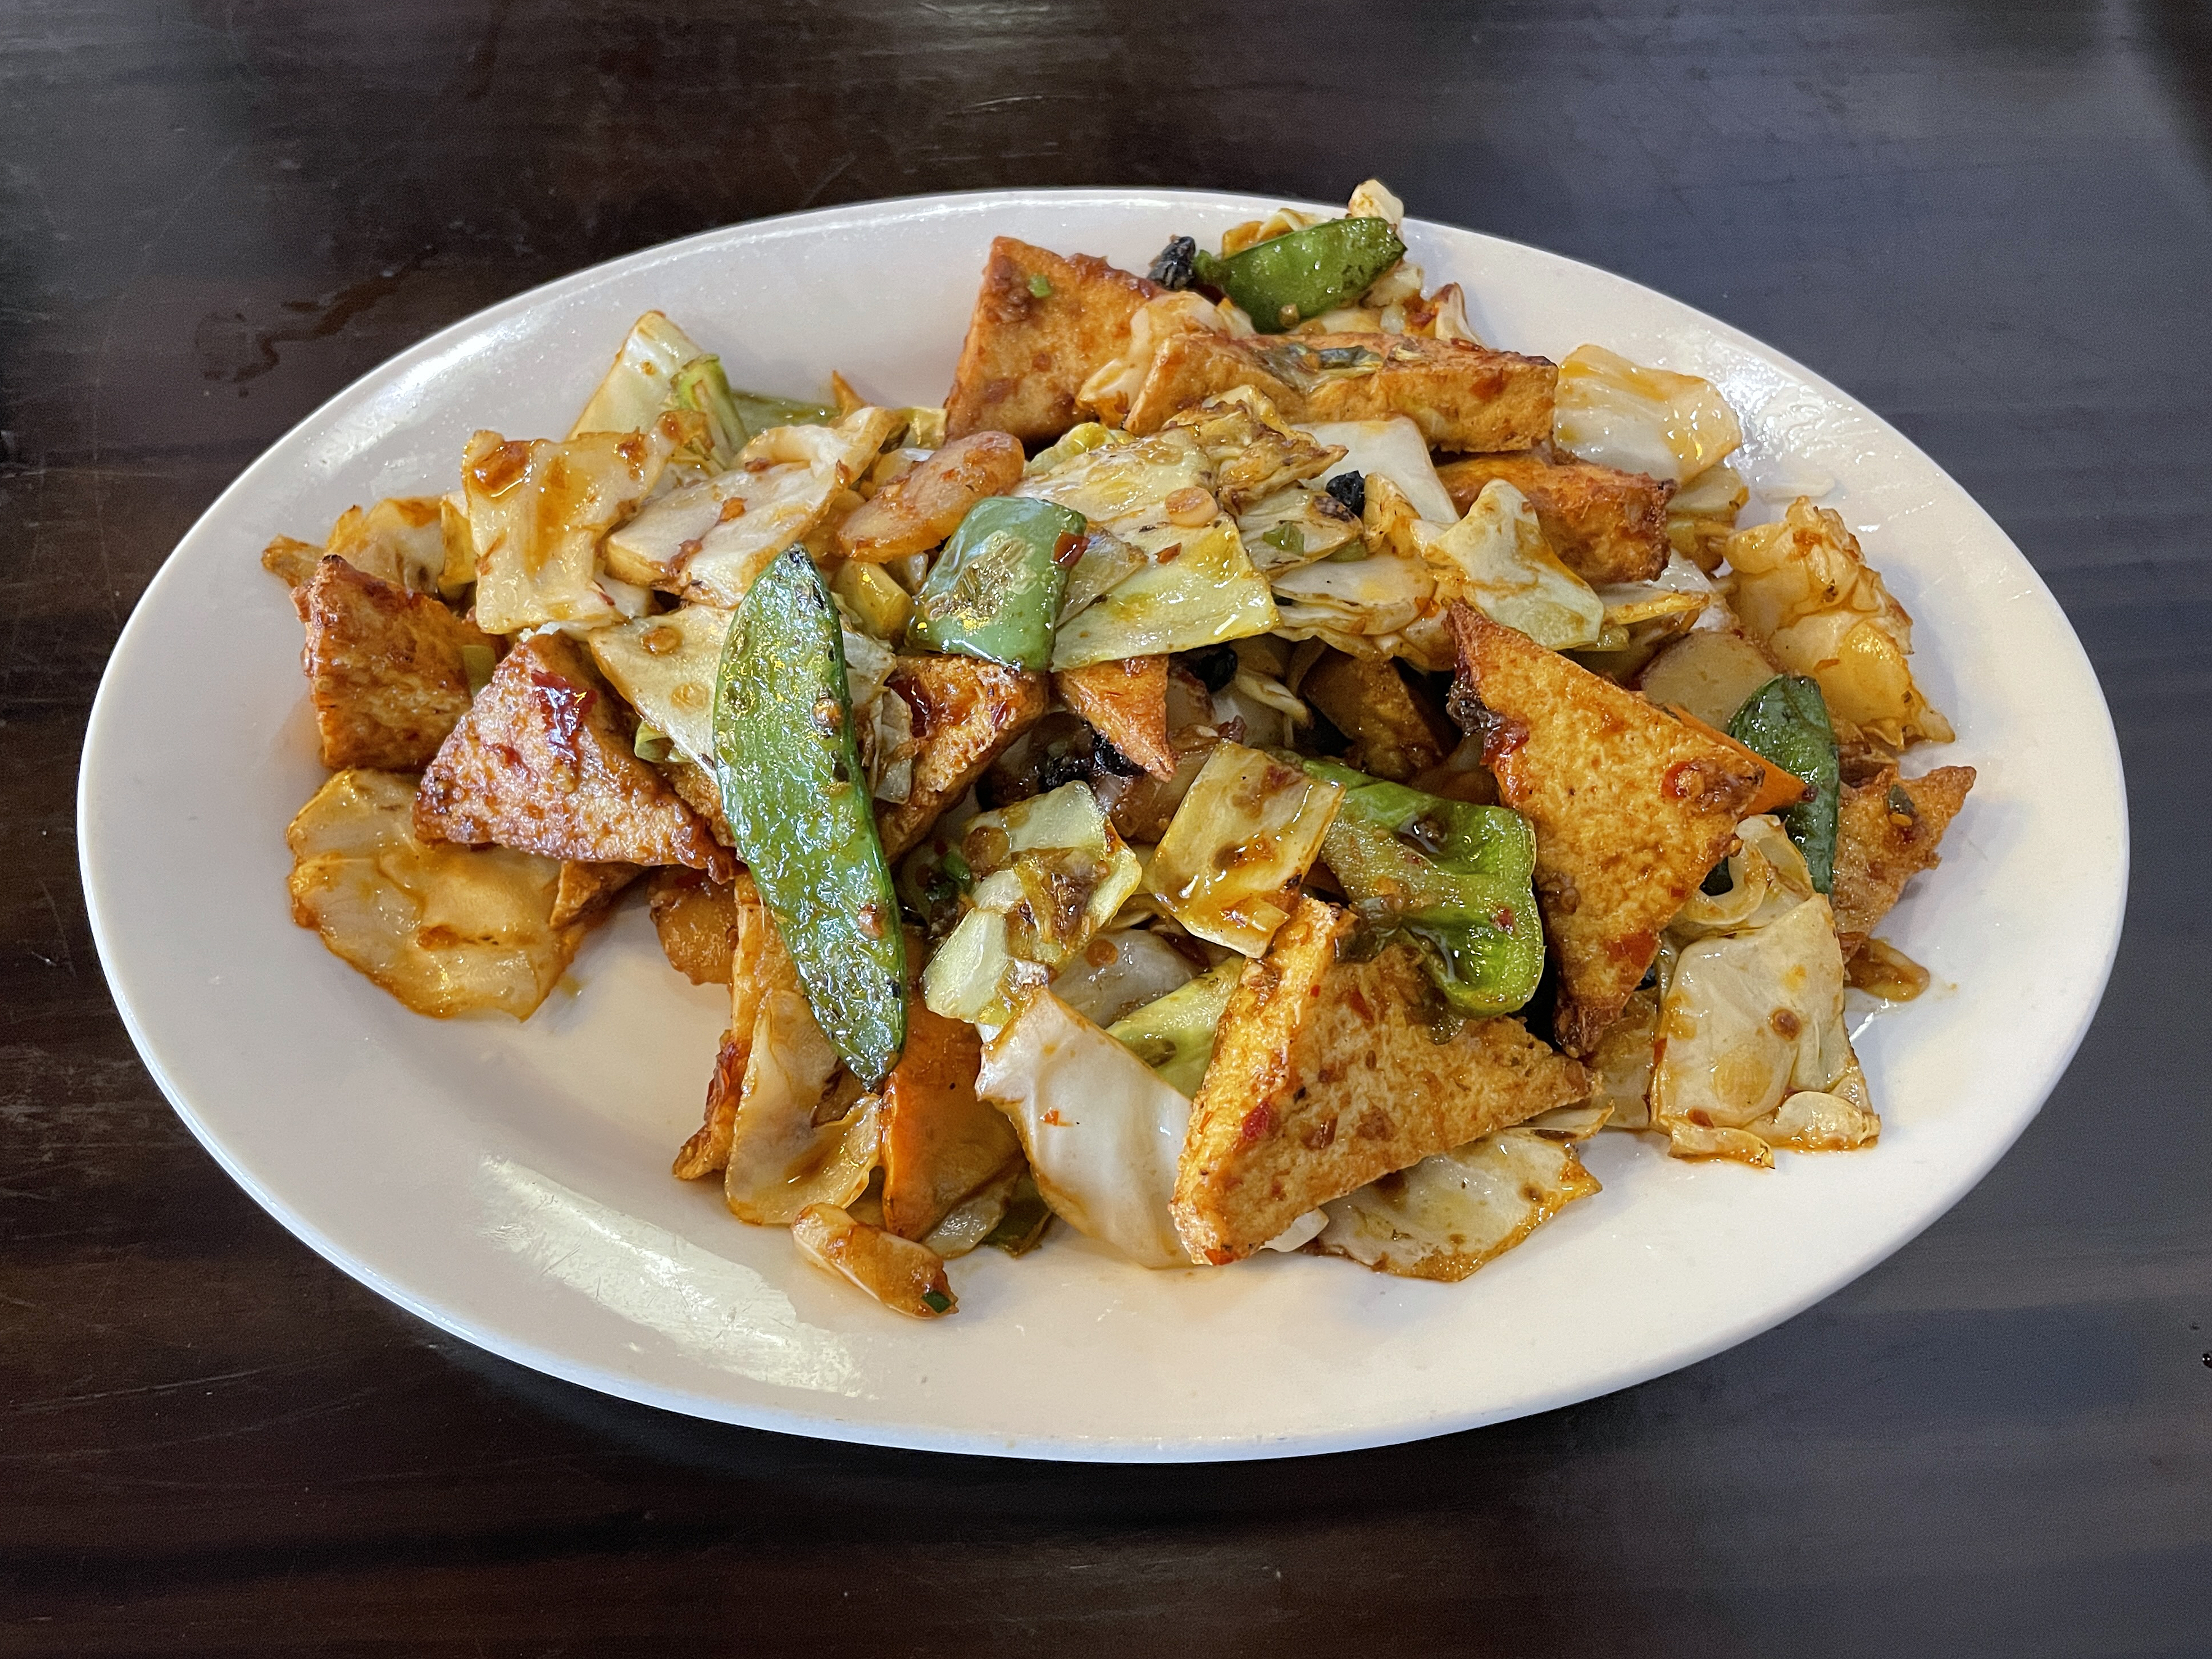 Twice-cooked tofu, a Sichuanese dish at Jasmine Asian Bistro, presents tender tofu crisp-fried and bathed in spice.